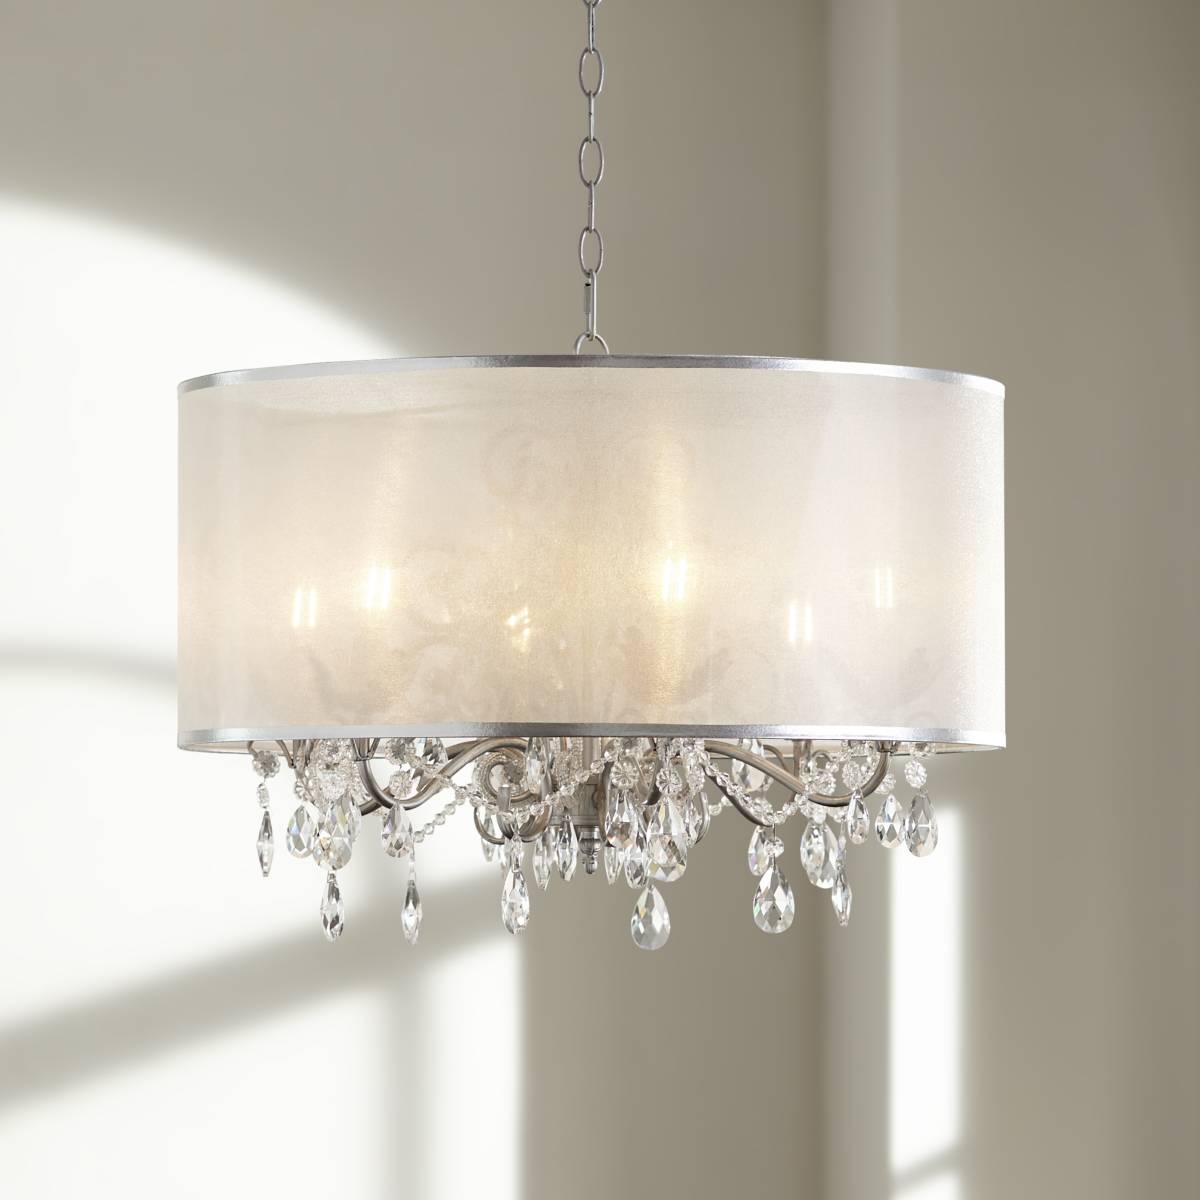 Plug-In Chandeliers - Easy to Install Elegance | Lamps Plus